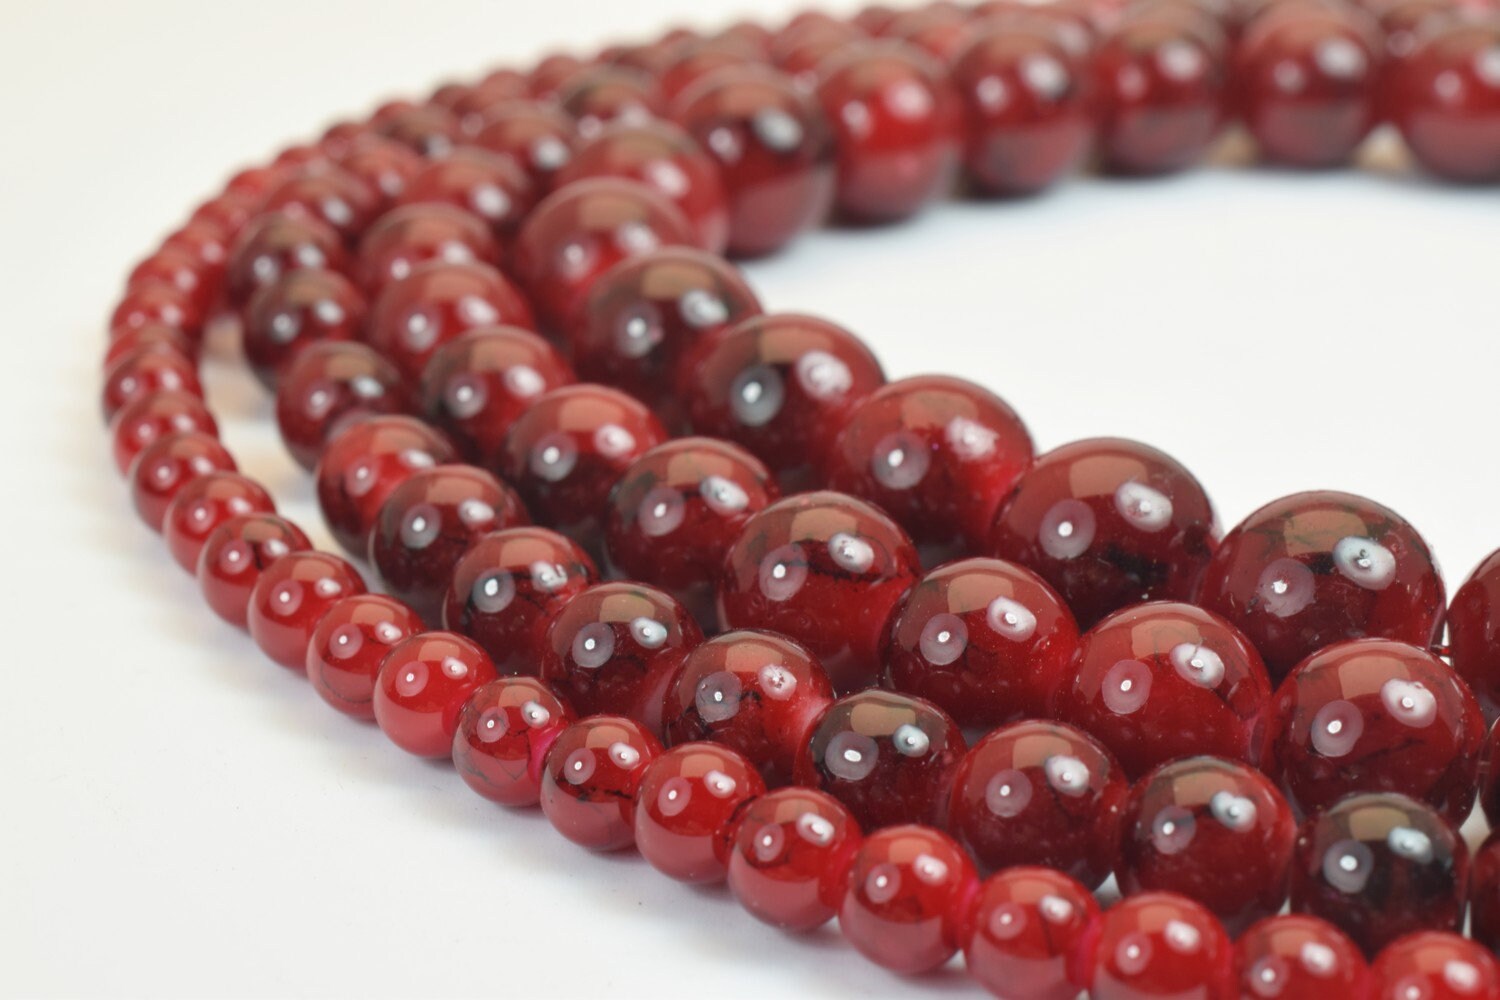 Glass Beads Round Beads Two Tone Red And Black 6mm/8mm/10mm/12mm Shine Round Beads For Jewelry Making Item# TTAD